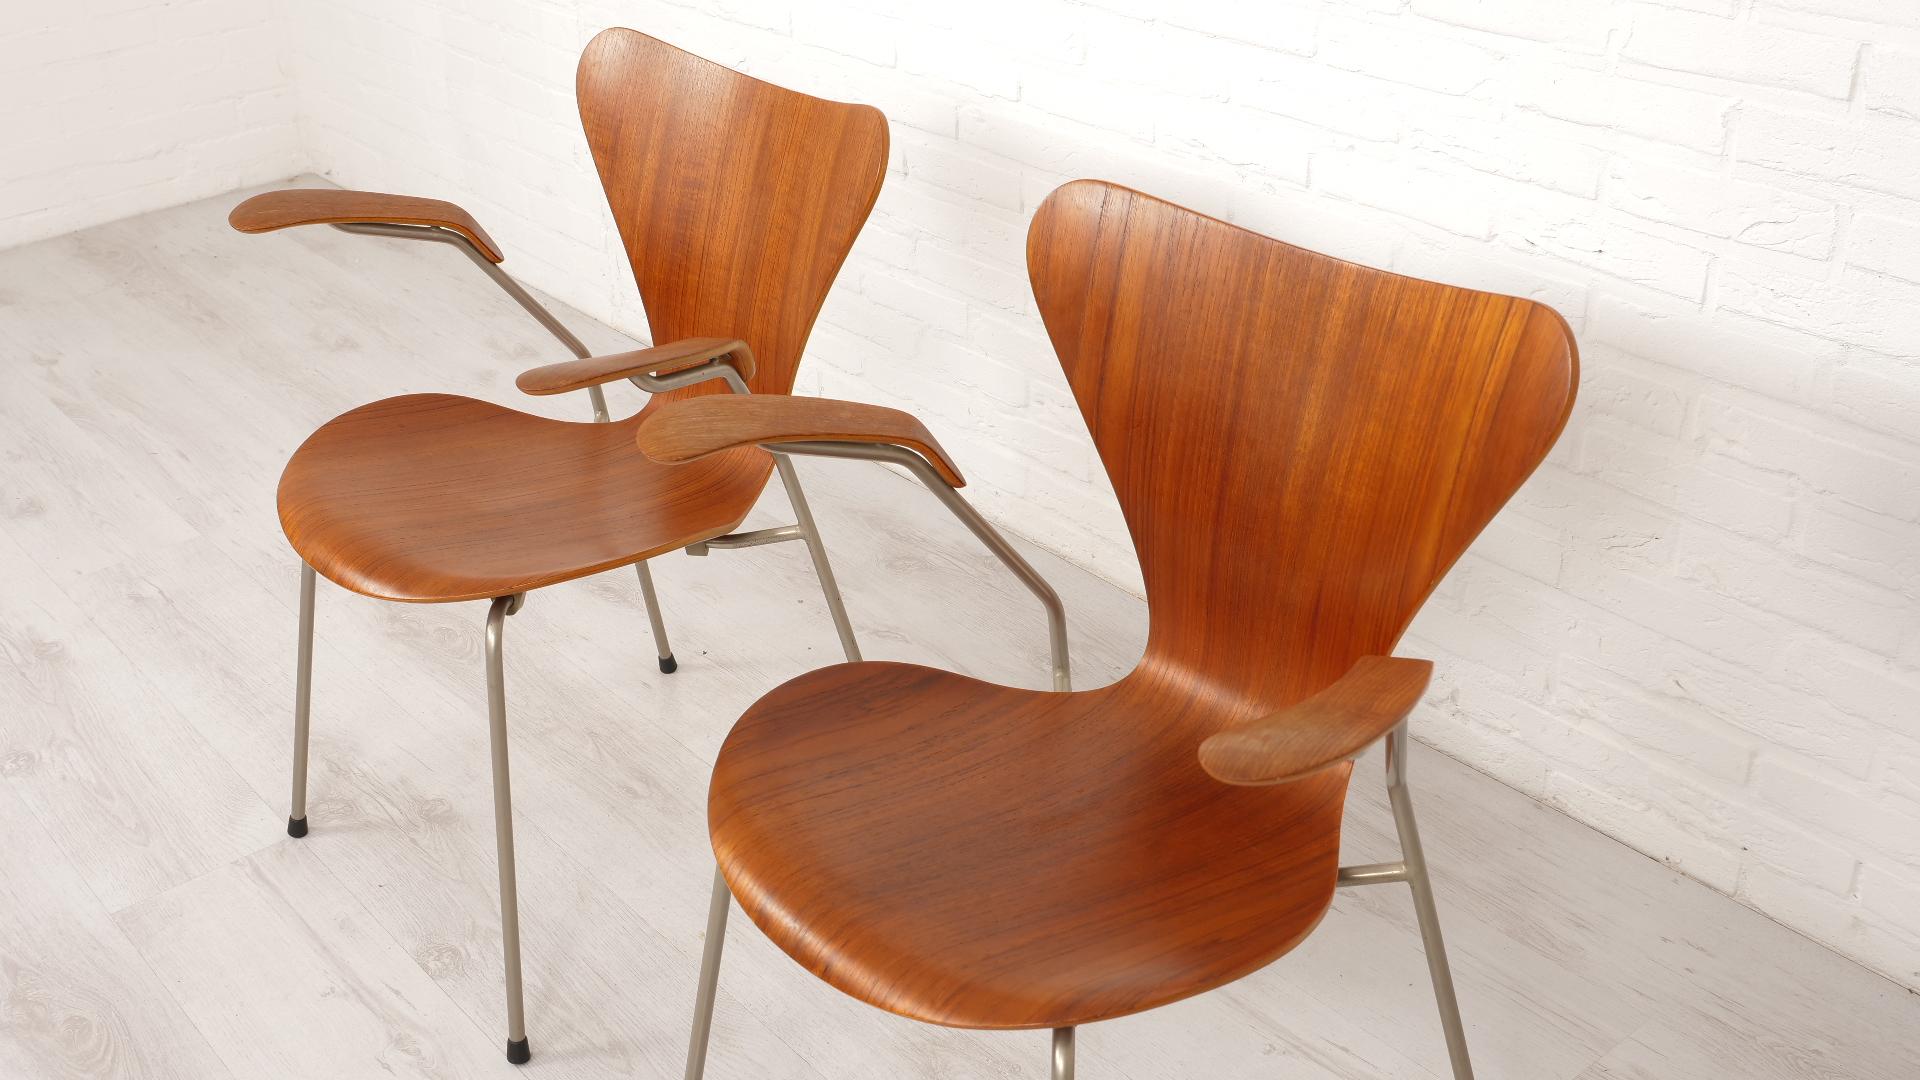 Mid-19th Century 2 Vintage butterfly chairs with armrests by Arne Jacobsen model 3207 Teak